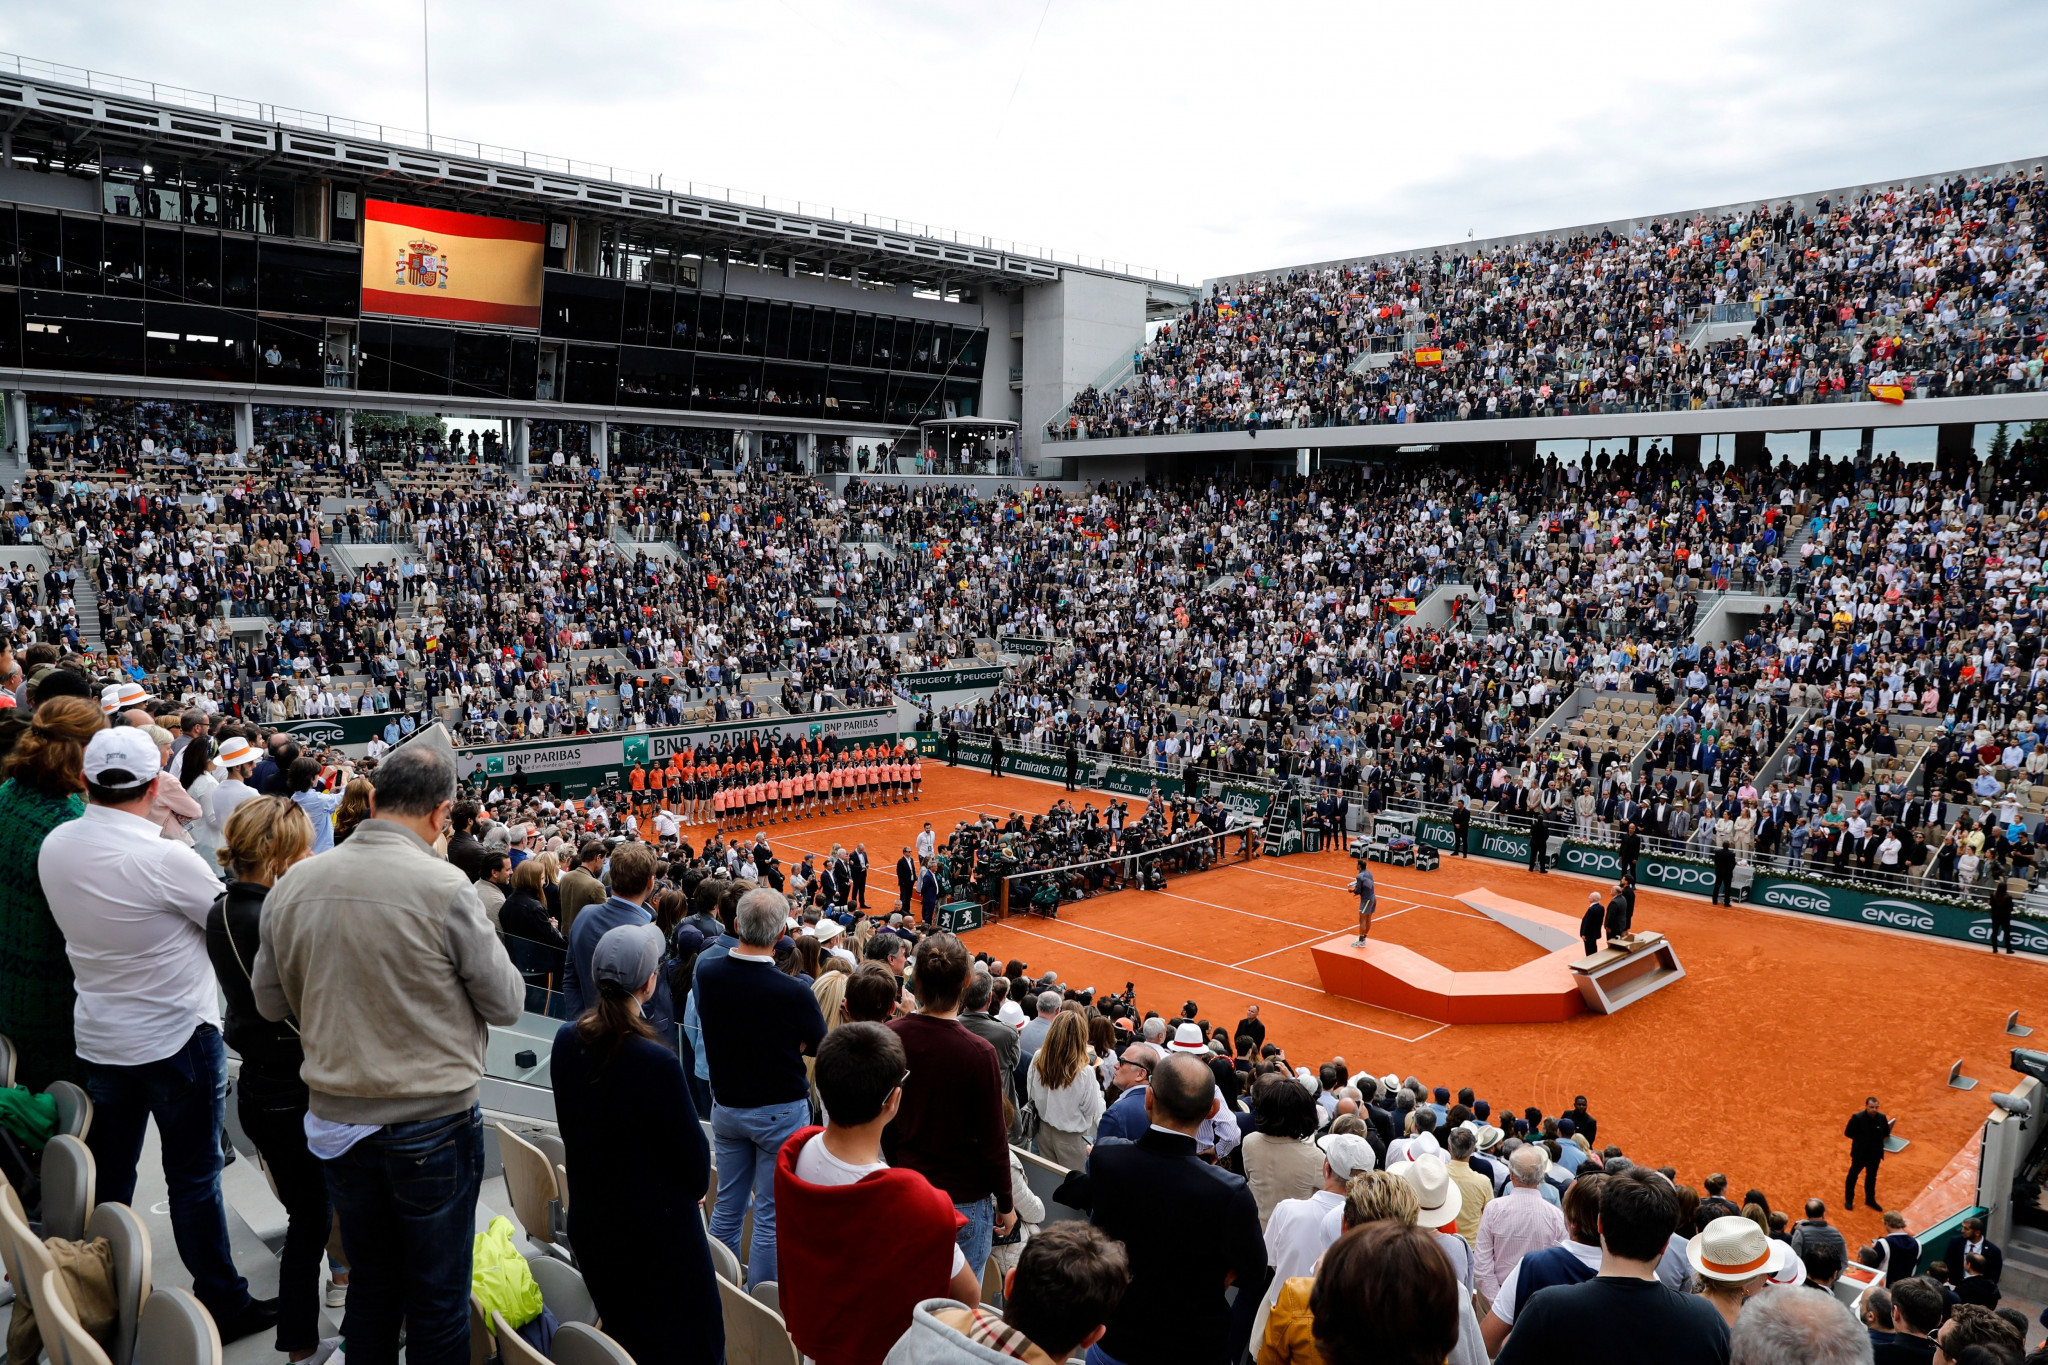 Roland Garros will be split into three sites with the number of spectators limited ©Getty Images